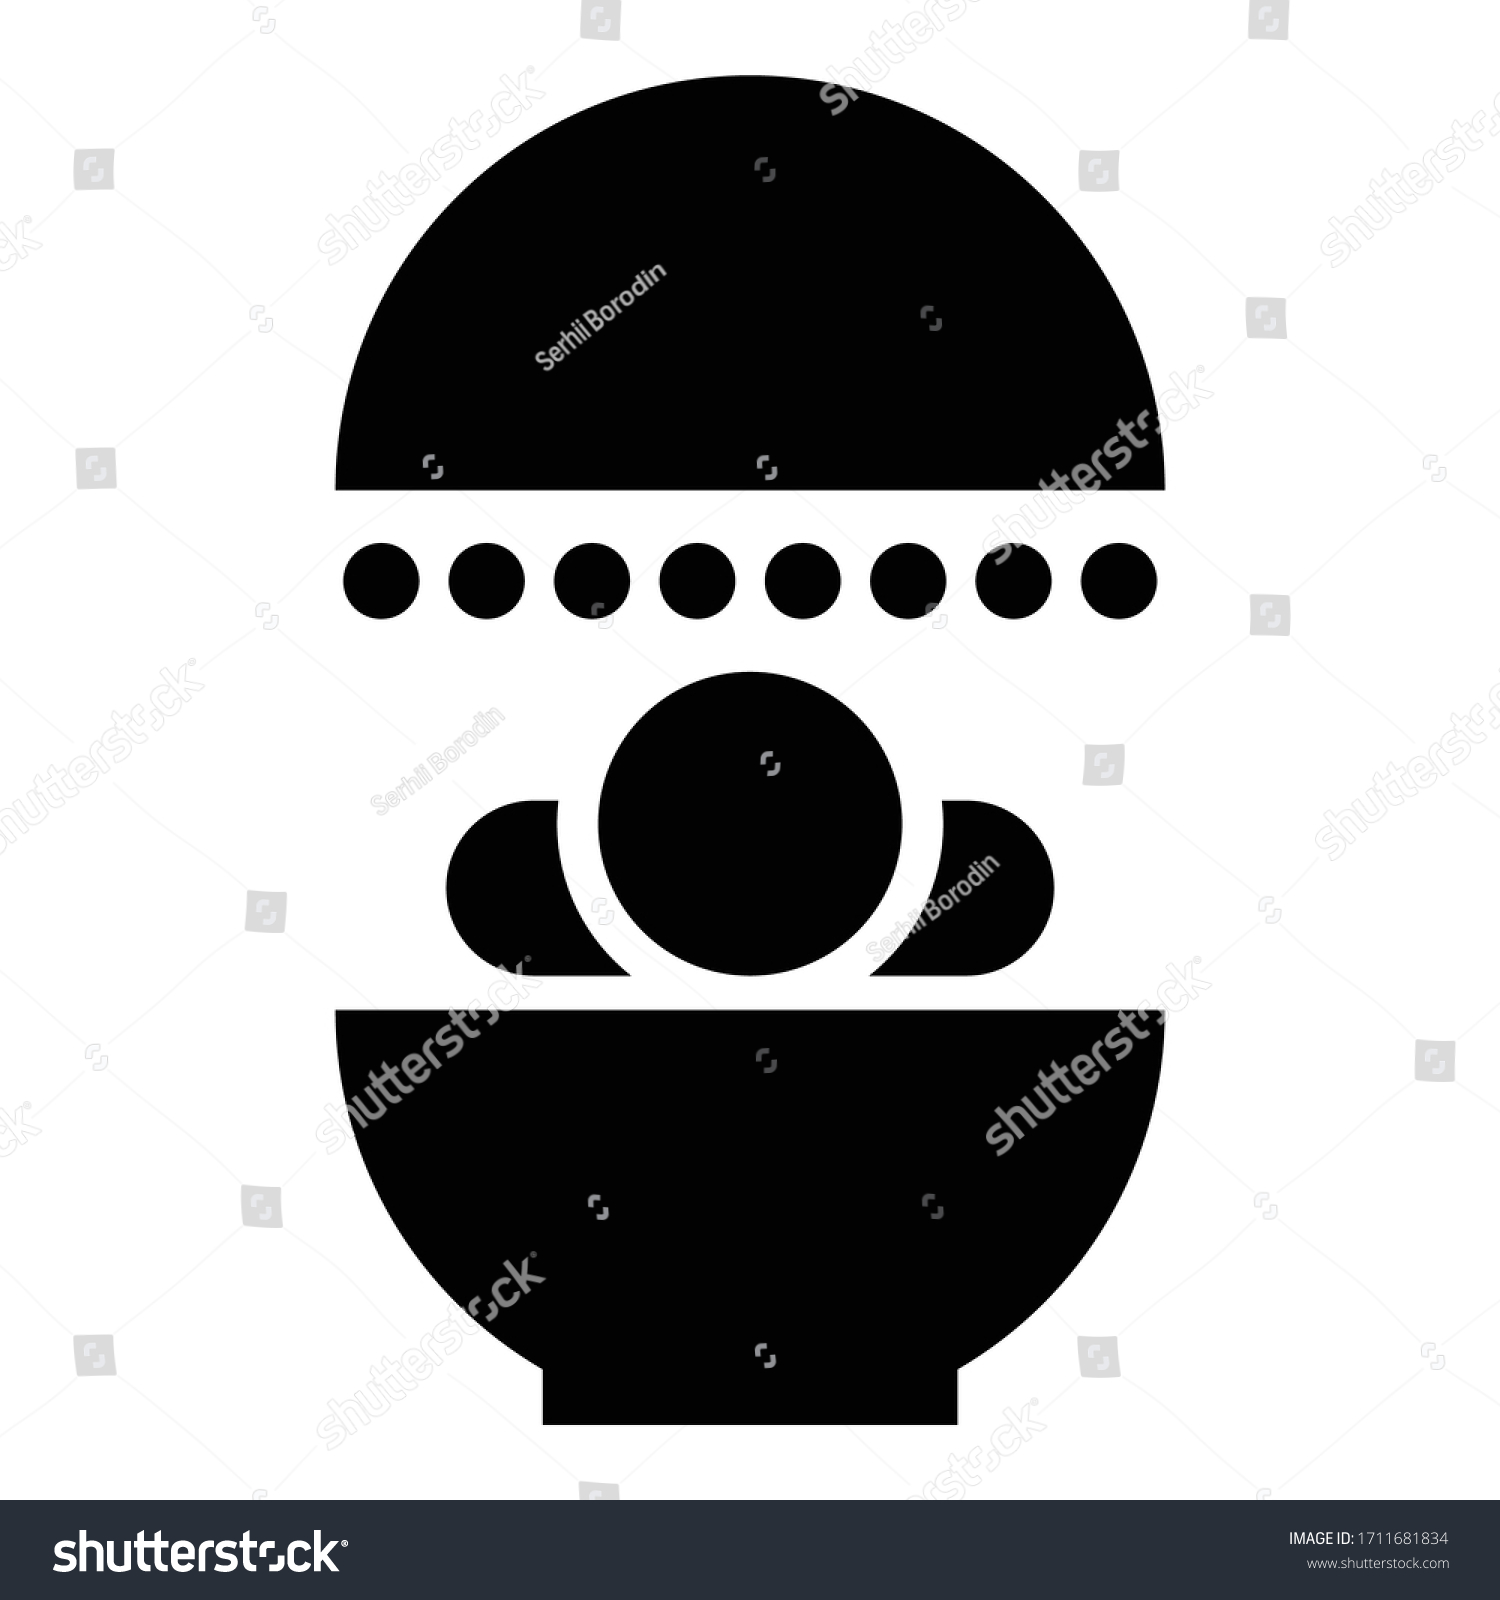 SVG of Solarium Human treatment exposure therapy Body CT scanning CAT Scan Radiotherapy icon black color vector illustration flat style image svg